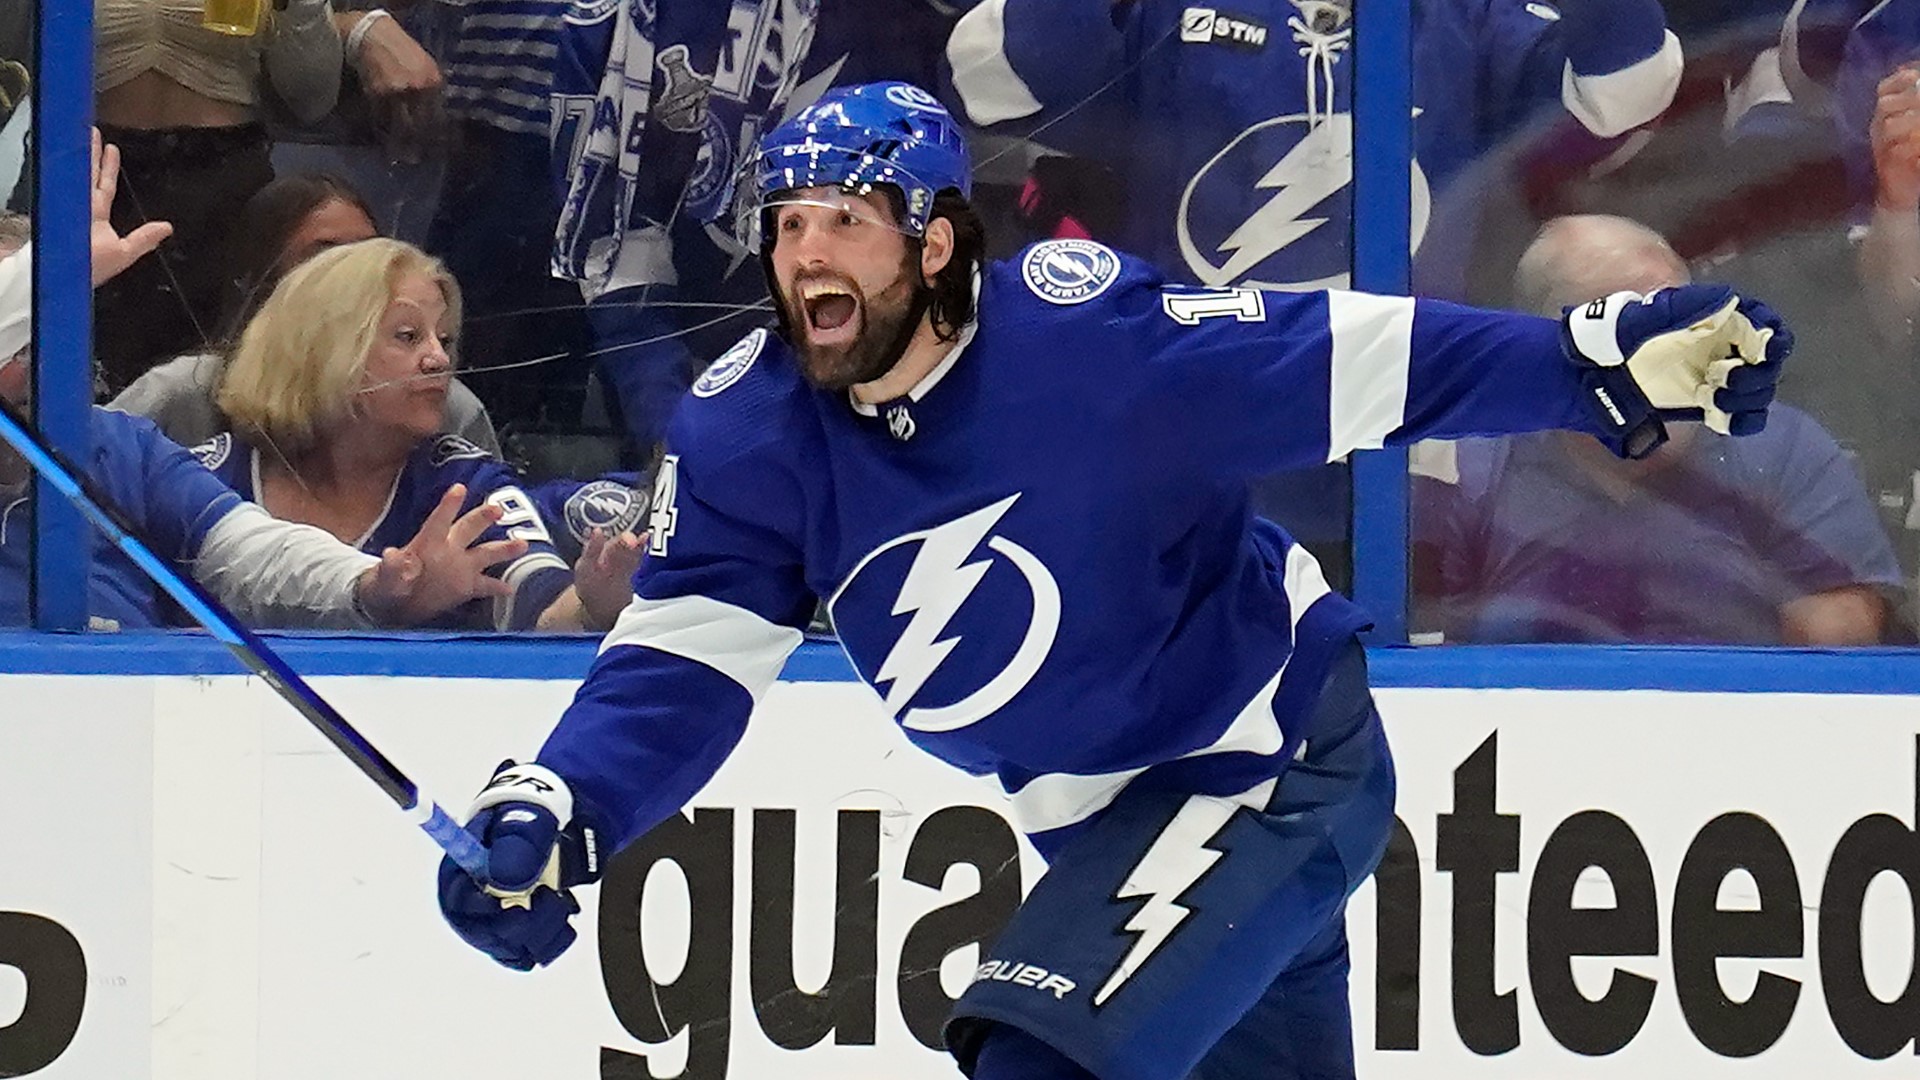 Pat Maroon is set to play in his fourth straight Stanley Cup Final. And you better believe this St. Louis boy wants to beat Stan Kroenke's Colorado Avalanche.